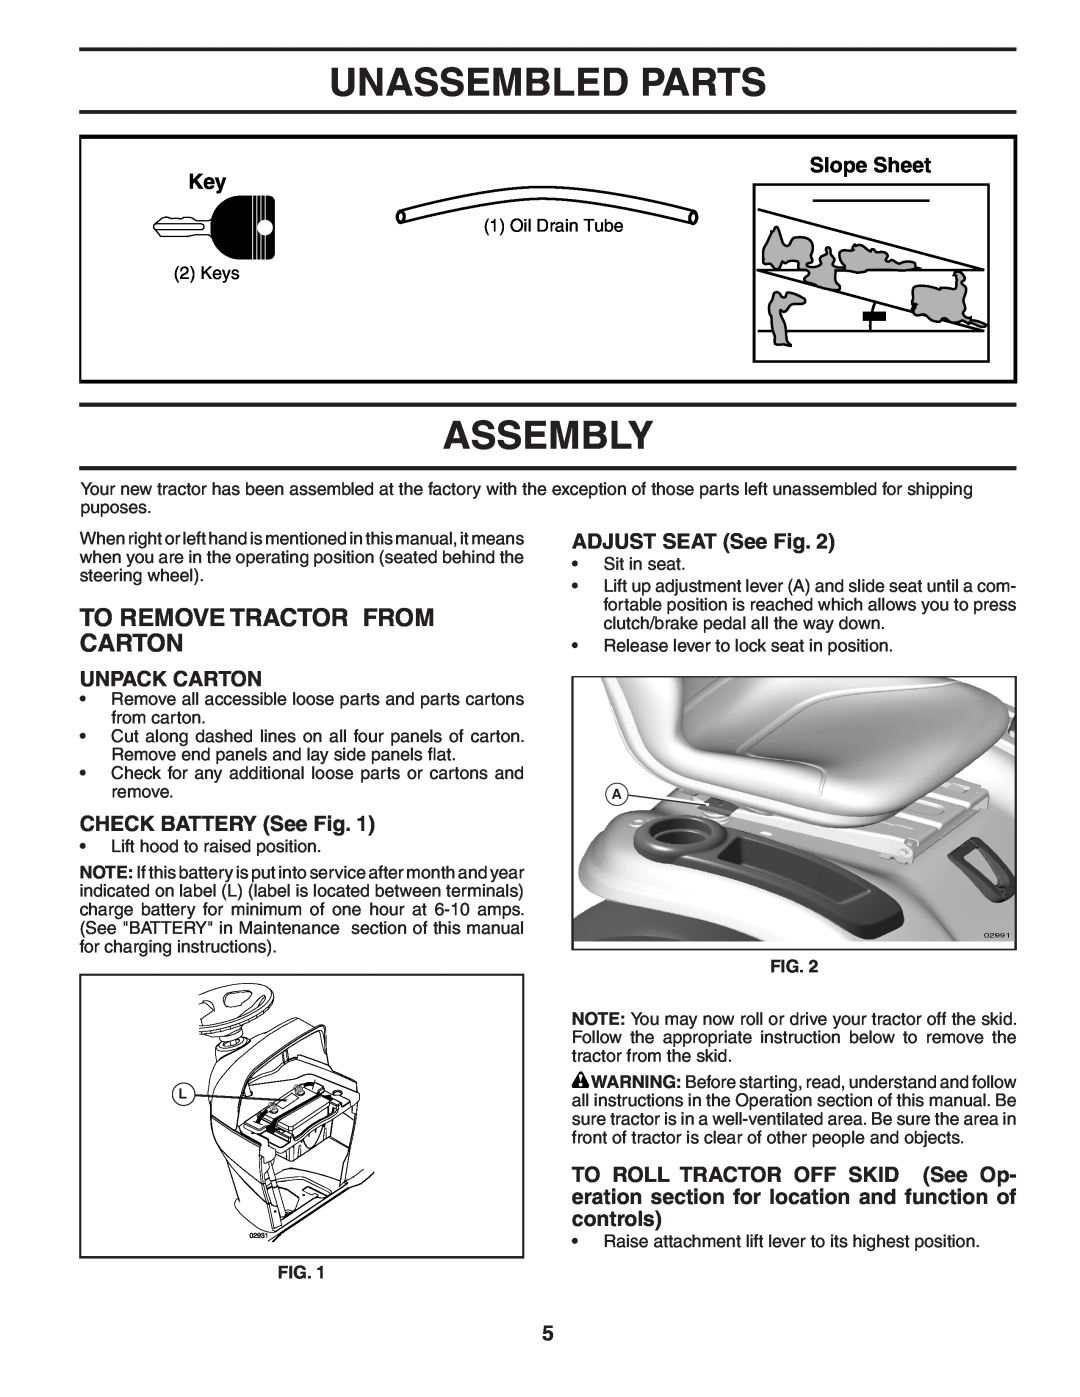 Poulan XT22H48YT manual Unassembled Parts, Assembly, To Remove Tractor From Carton, Slope Sheet Key, Unpack Carton 